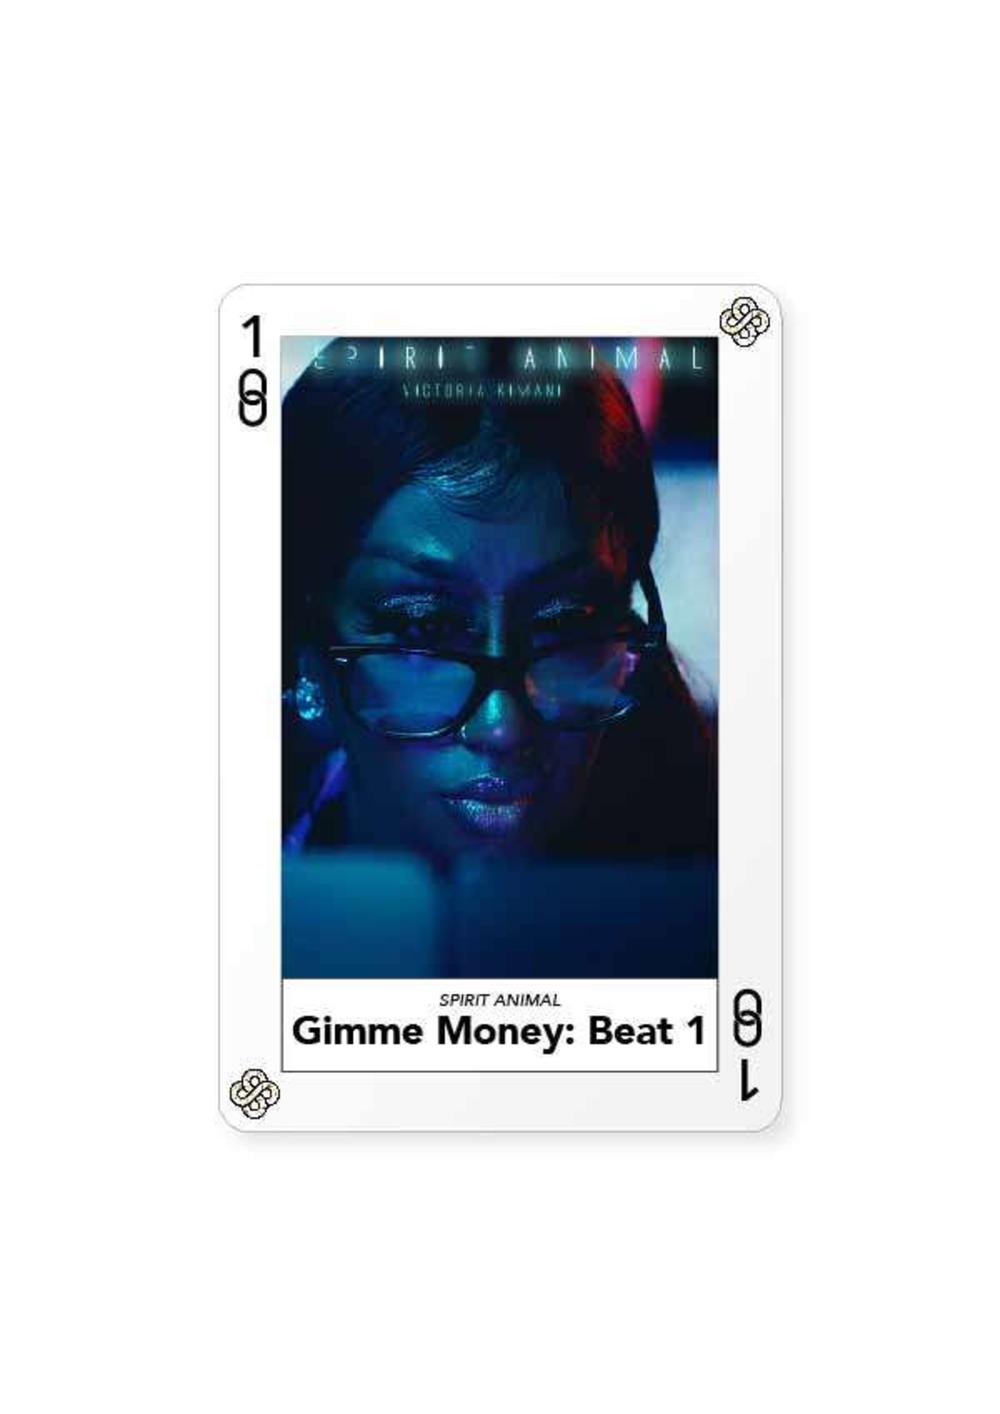 Certificate of Authenticity and Consignment - Gimme Money Beat 1